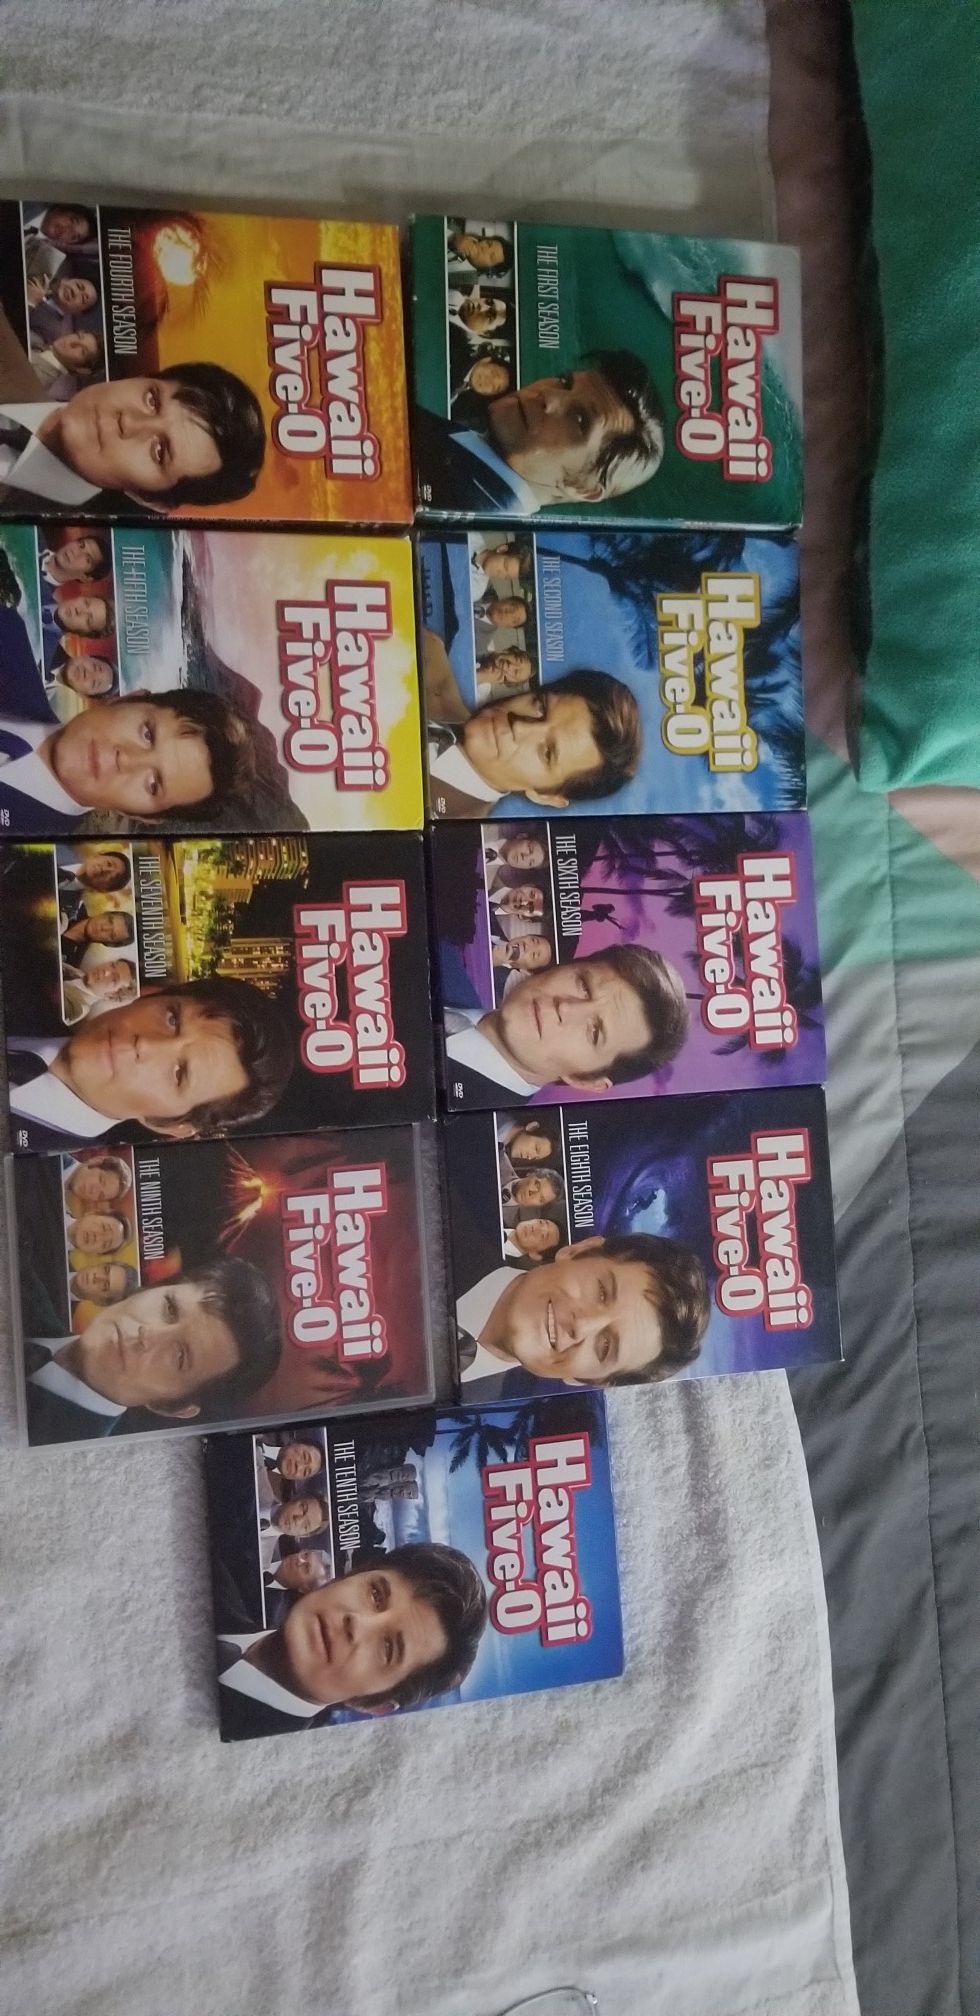 Hawaii five O series 1,2,4,5,6,7,8,9,10 missing only 3,11,12